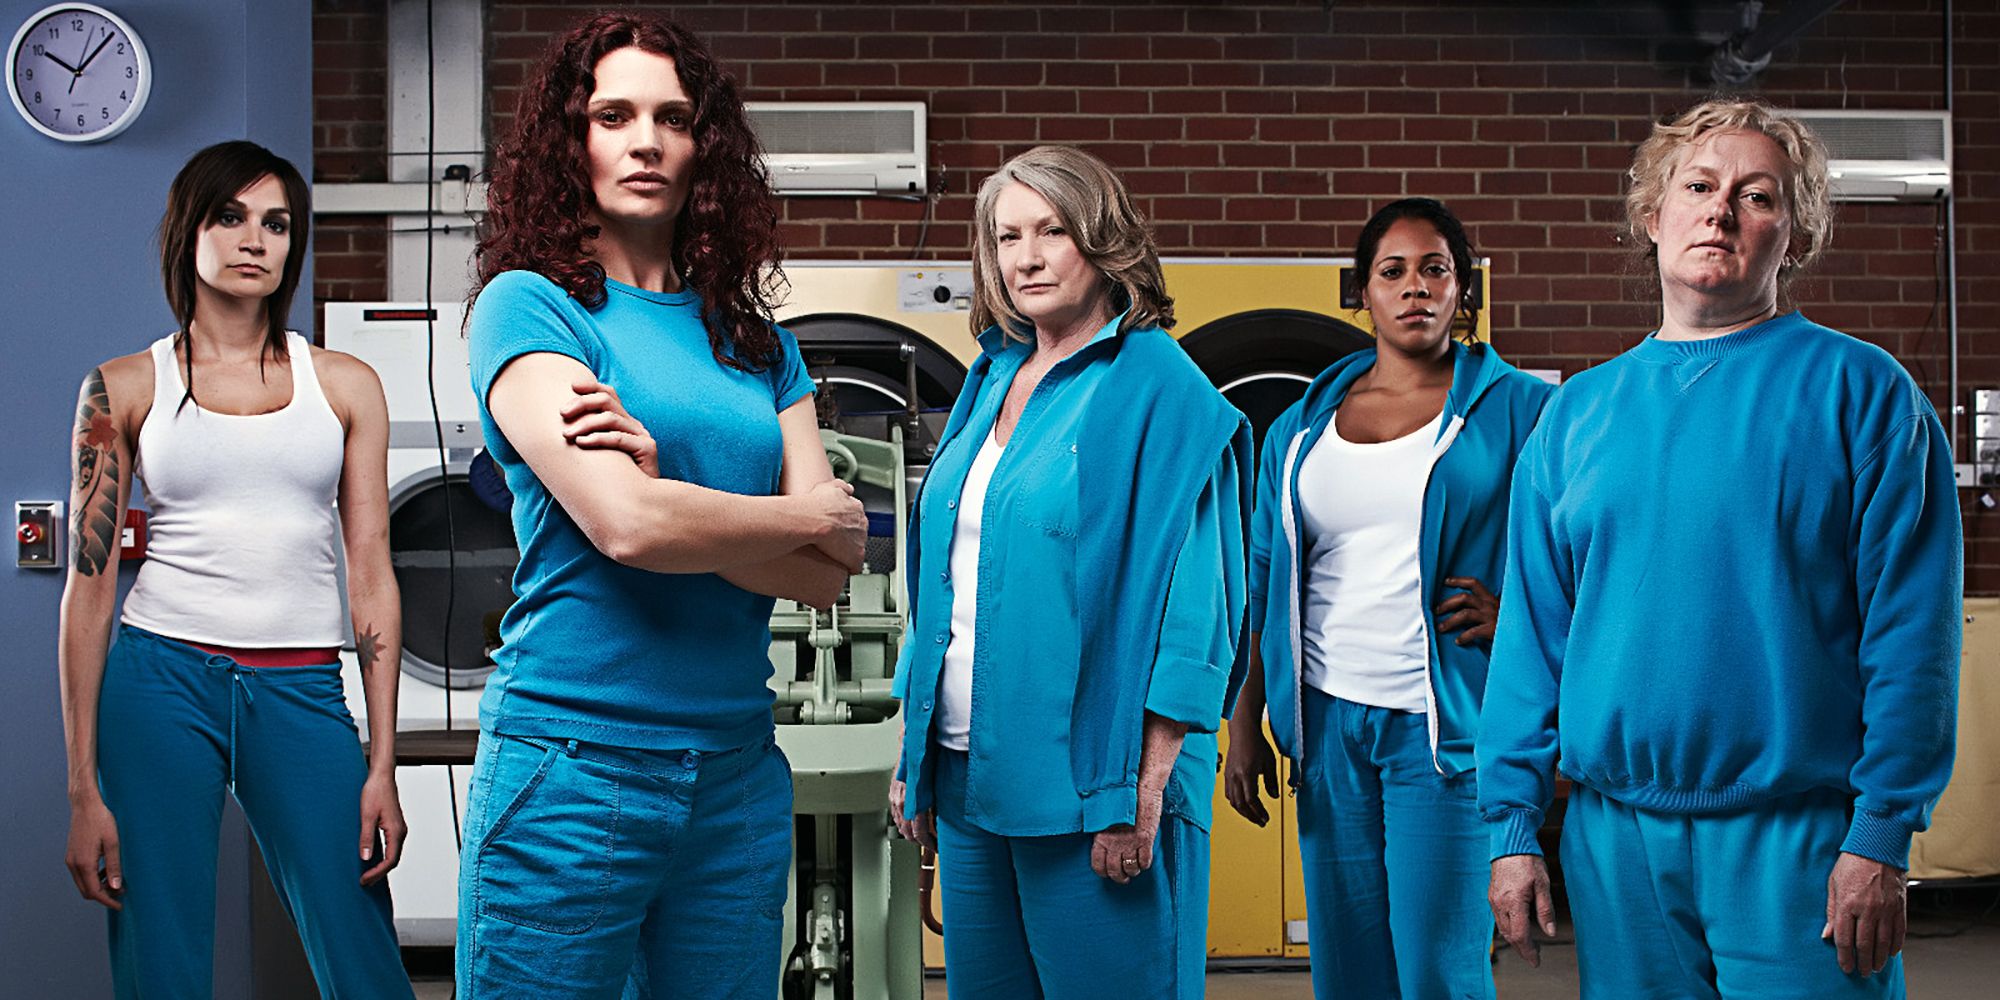 Set in a women's prison, 'Wentworth' is a gritty drama that pulls no punches